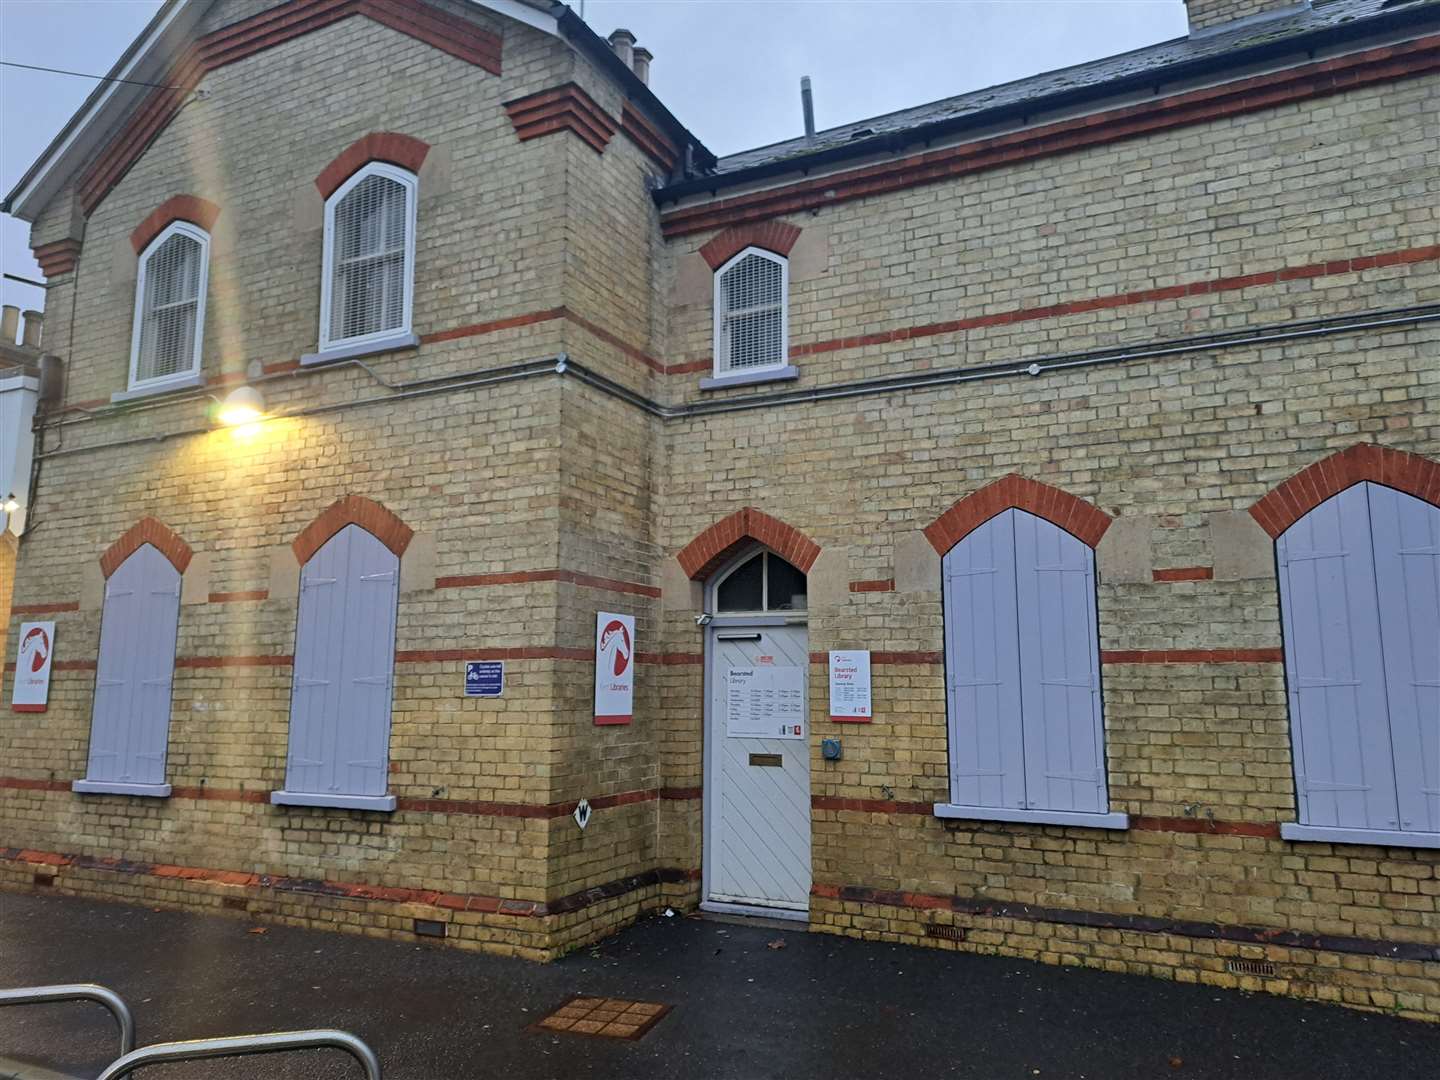 Bearsted Library is to stay at the station